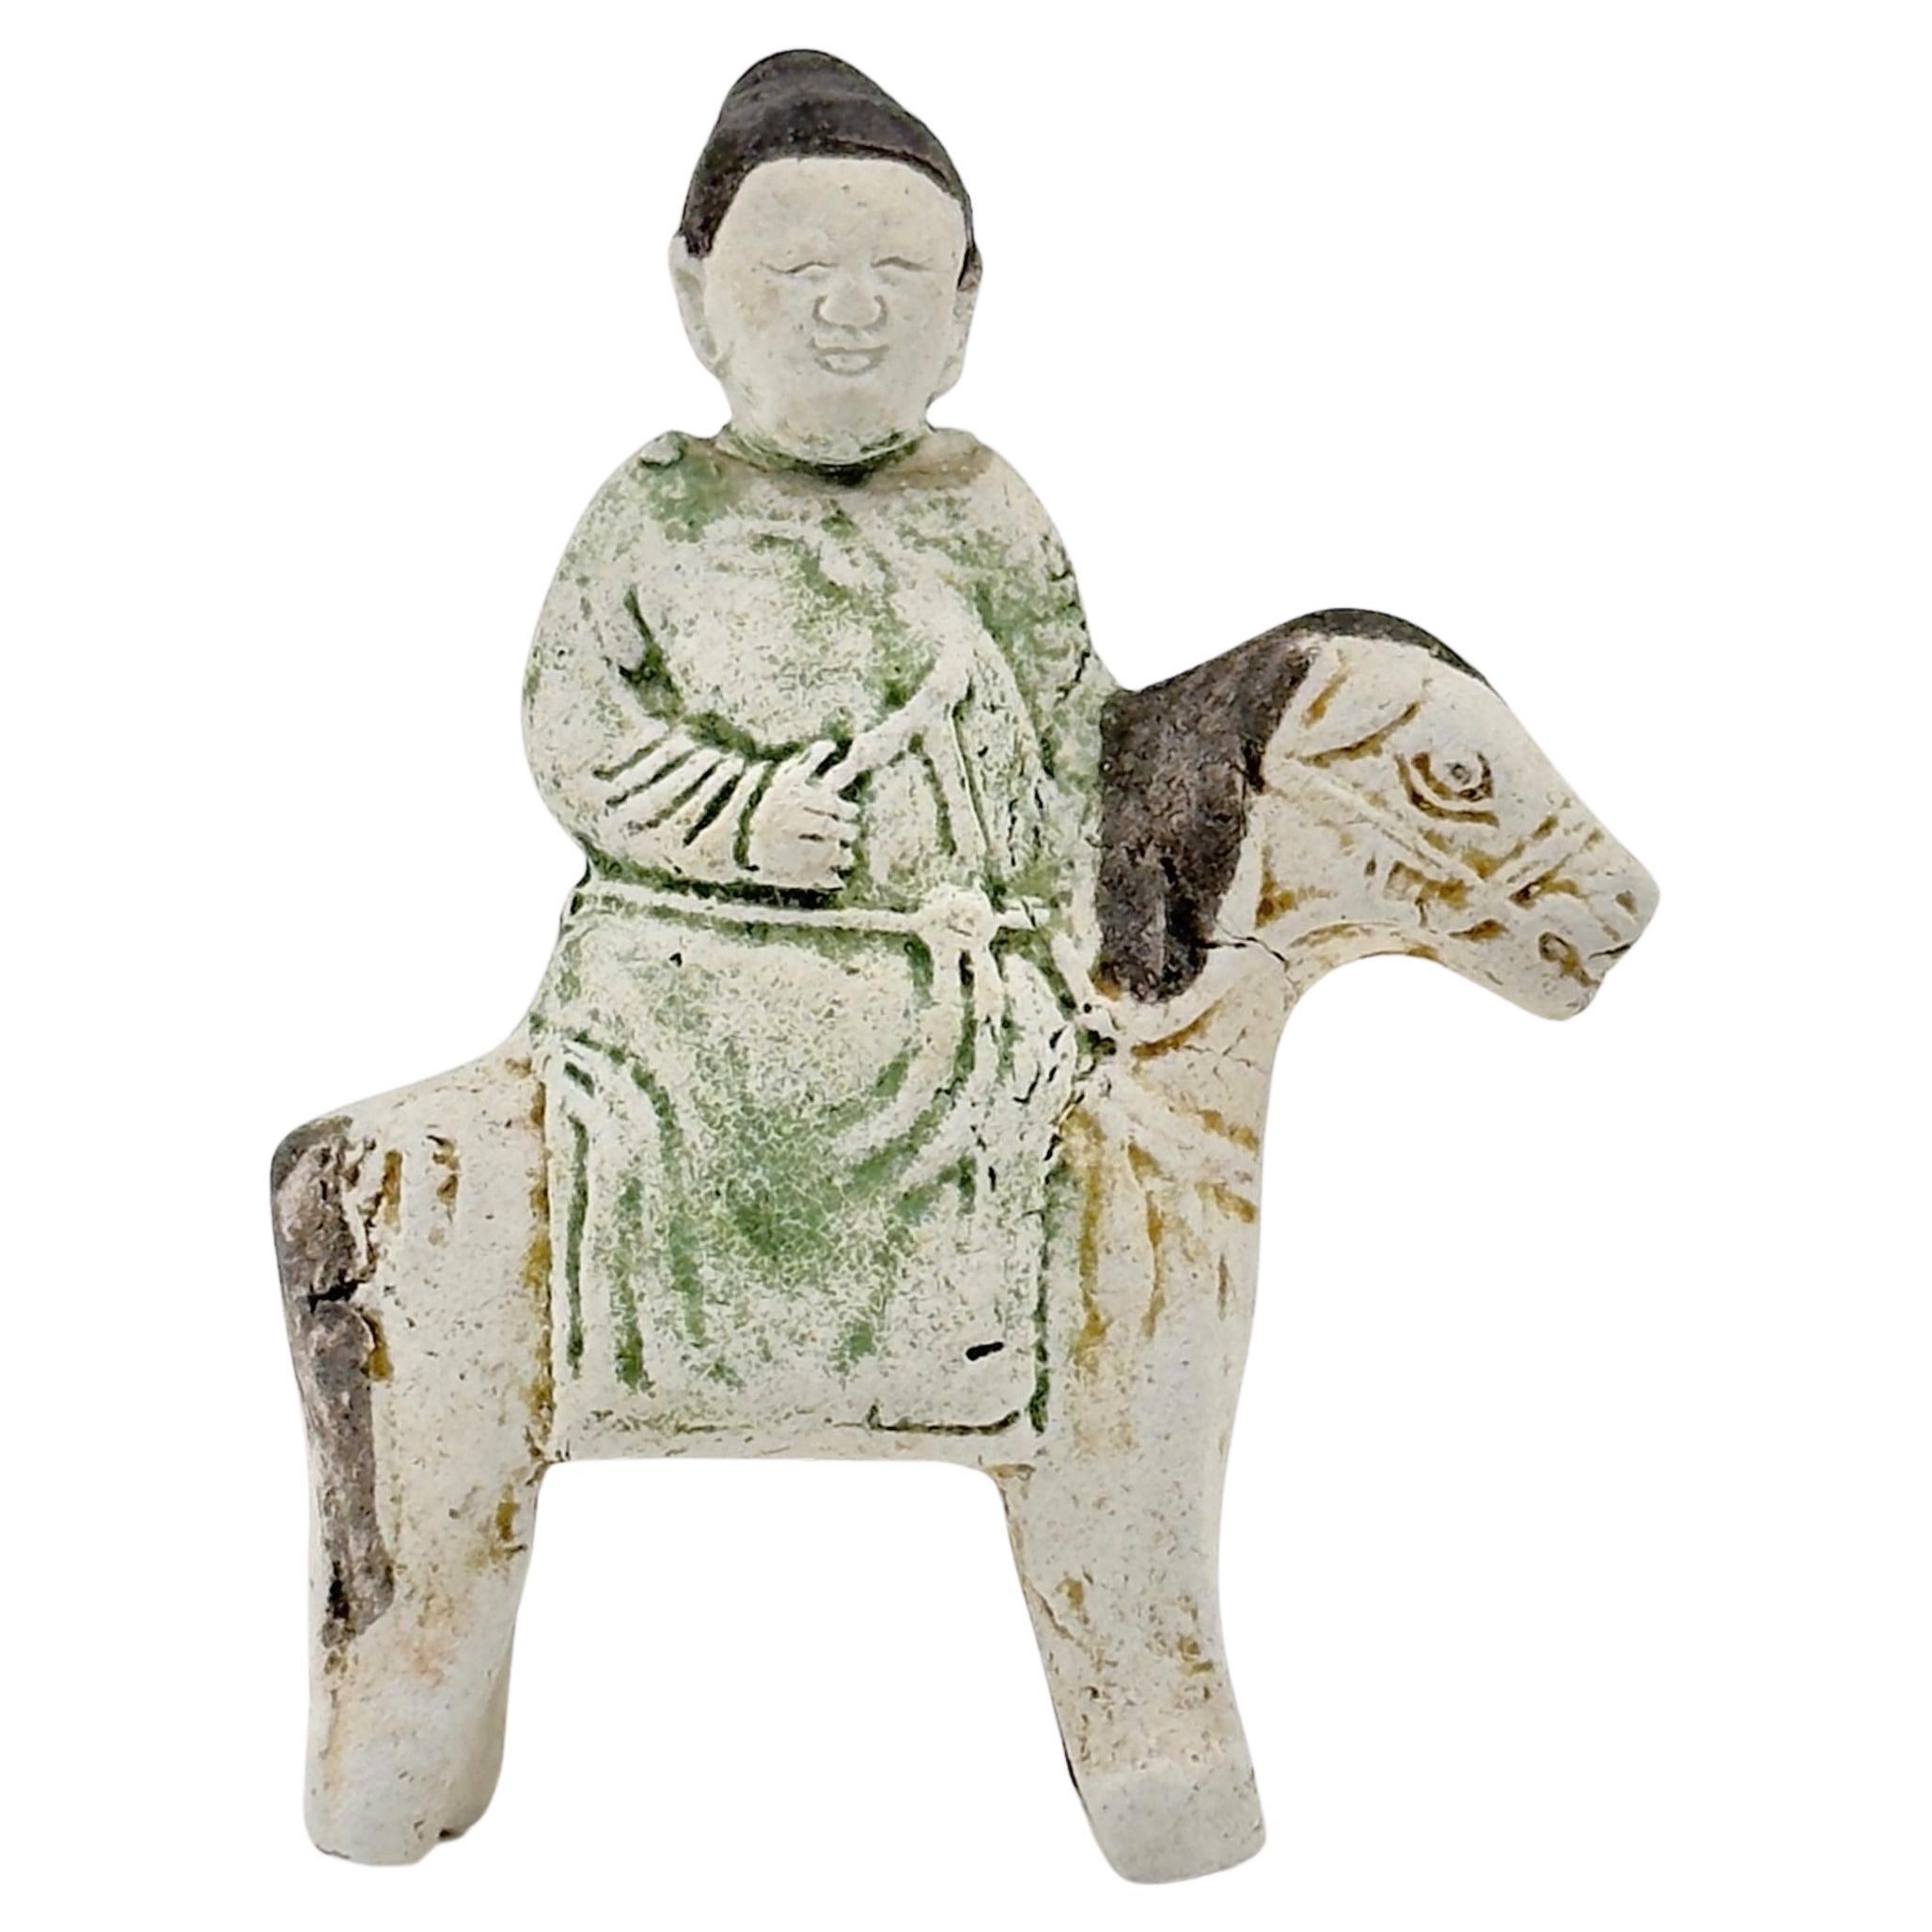 Horse and Rider Figurine c1725, Qing Dynasty, Yongzheng Reign